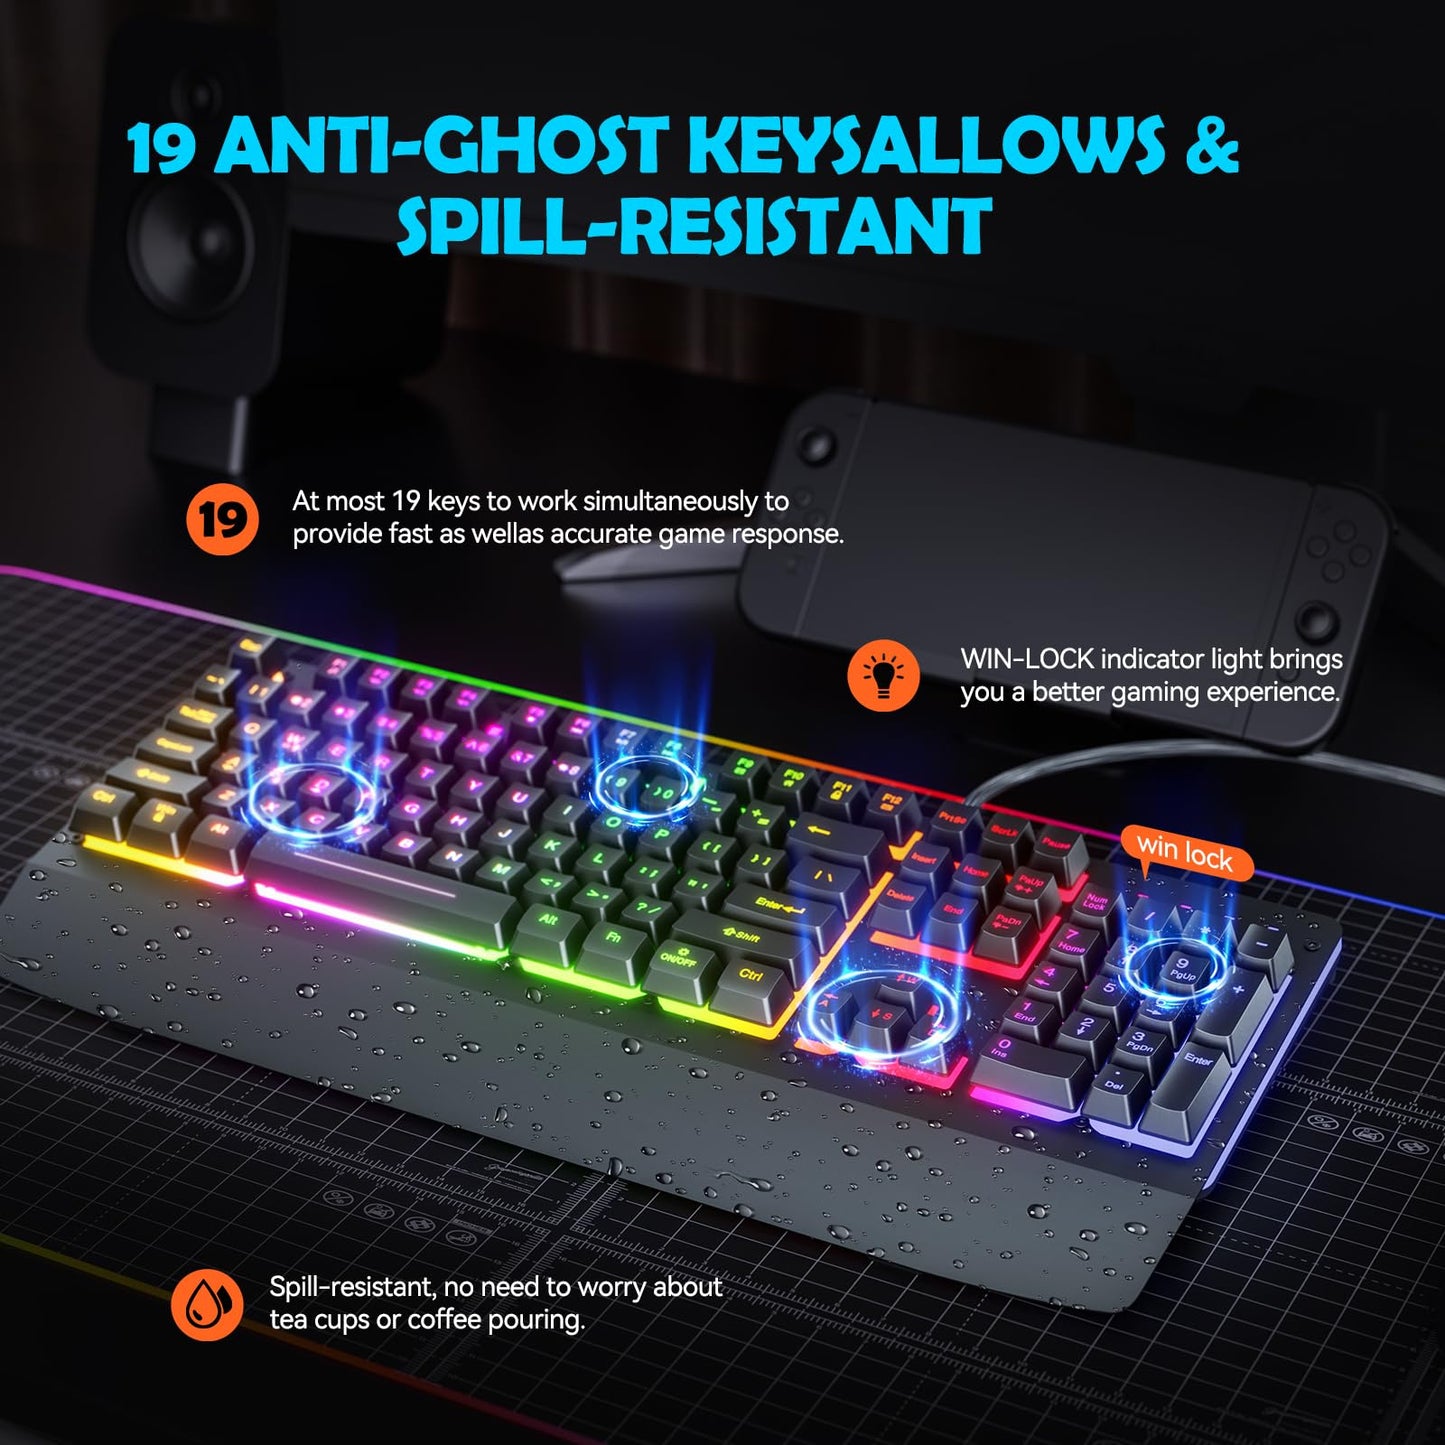 Gaming Keyboard, RGB Light Up Keyboard with Extended Wrist Rest Metal Panel, 104 Keys Rainbow Backlit Wired Keyboard for Gaming, Full Size Quiet Computer Keyboard, Multimedia Keys, Anti-ghosting Keys - amzGamess